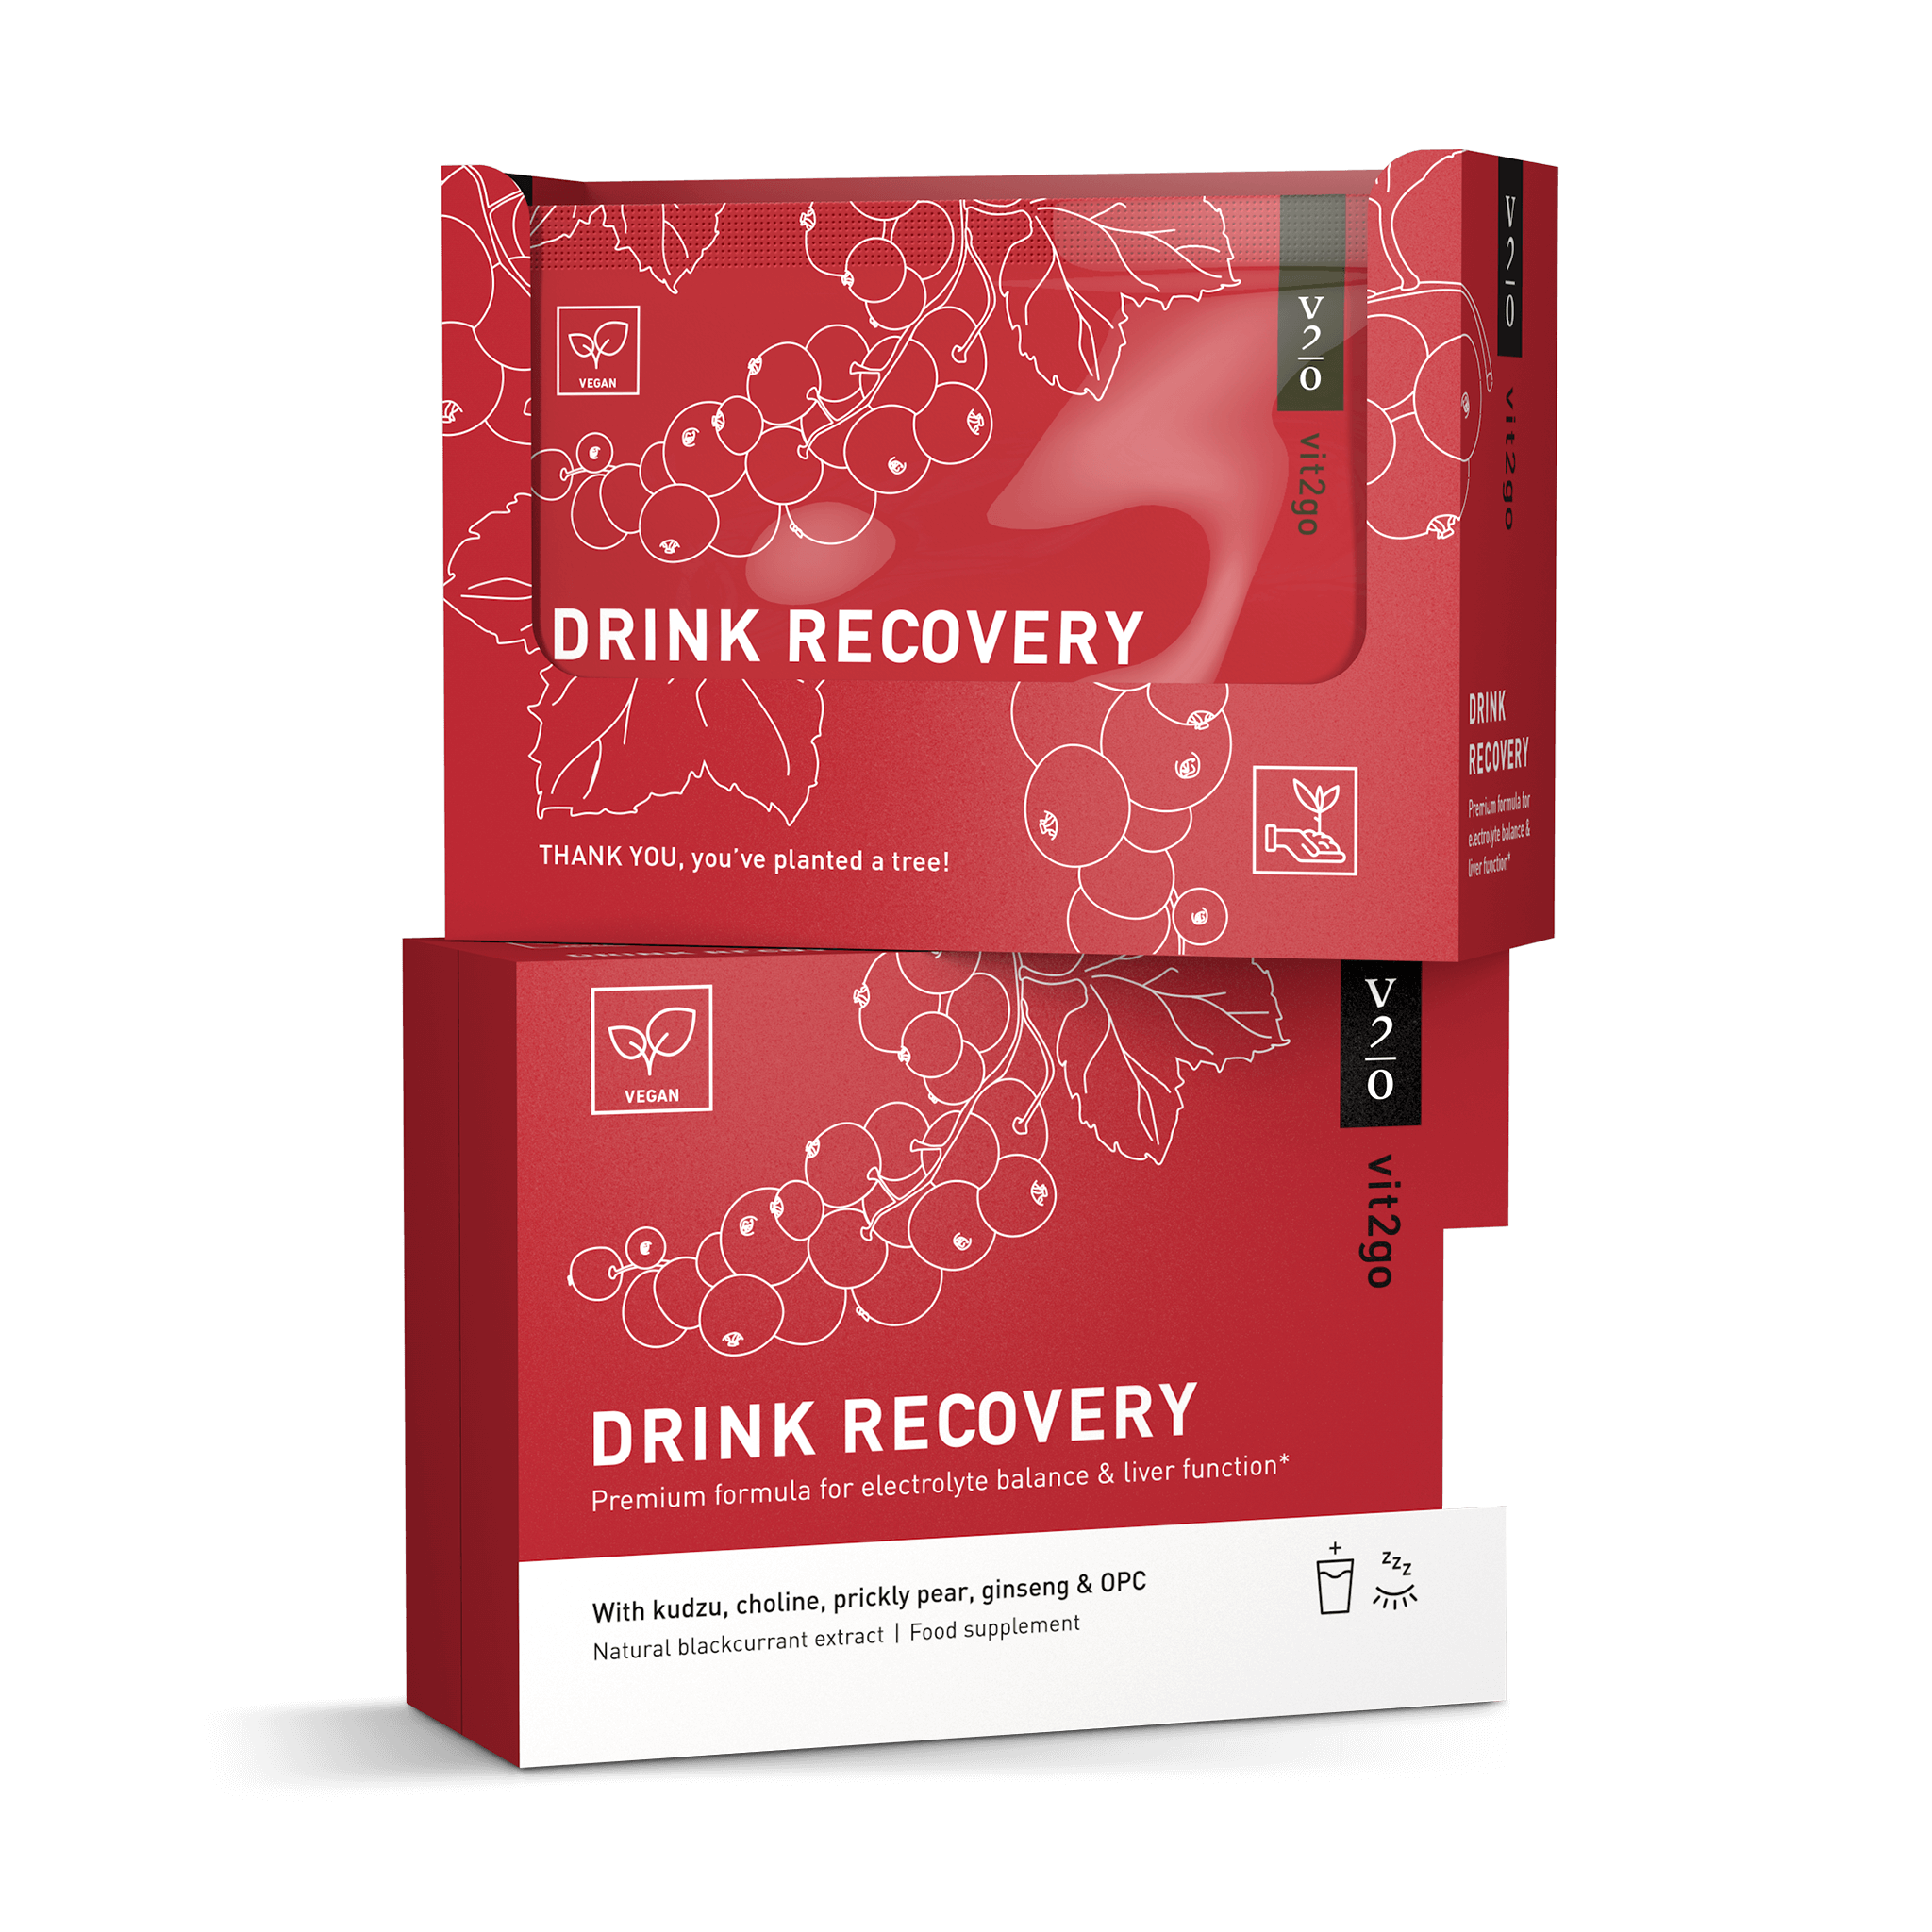 DRINK RECOVERY 10-PACKET BOX